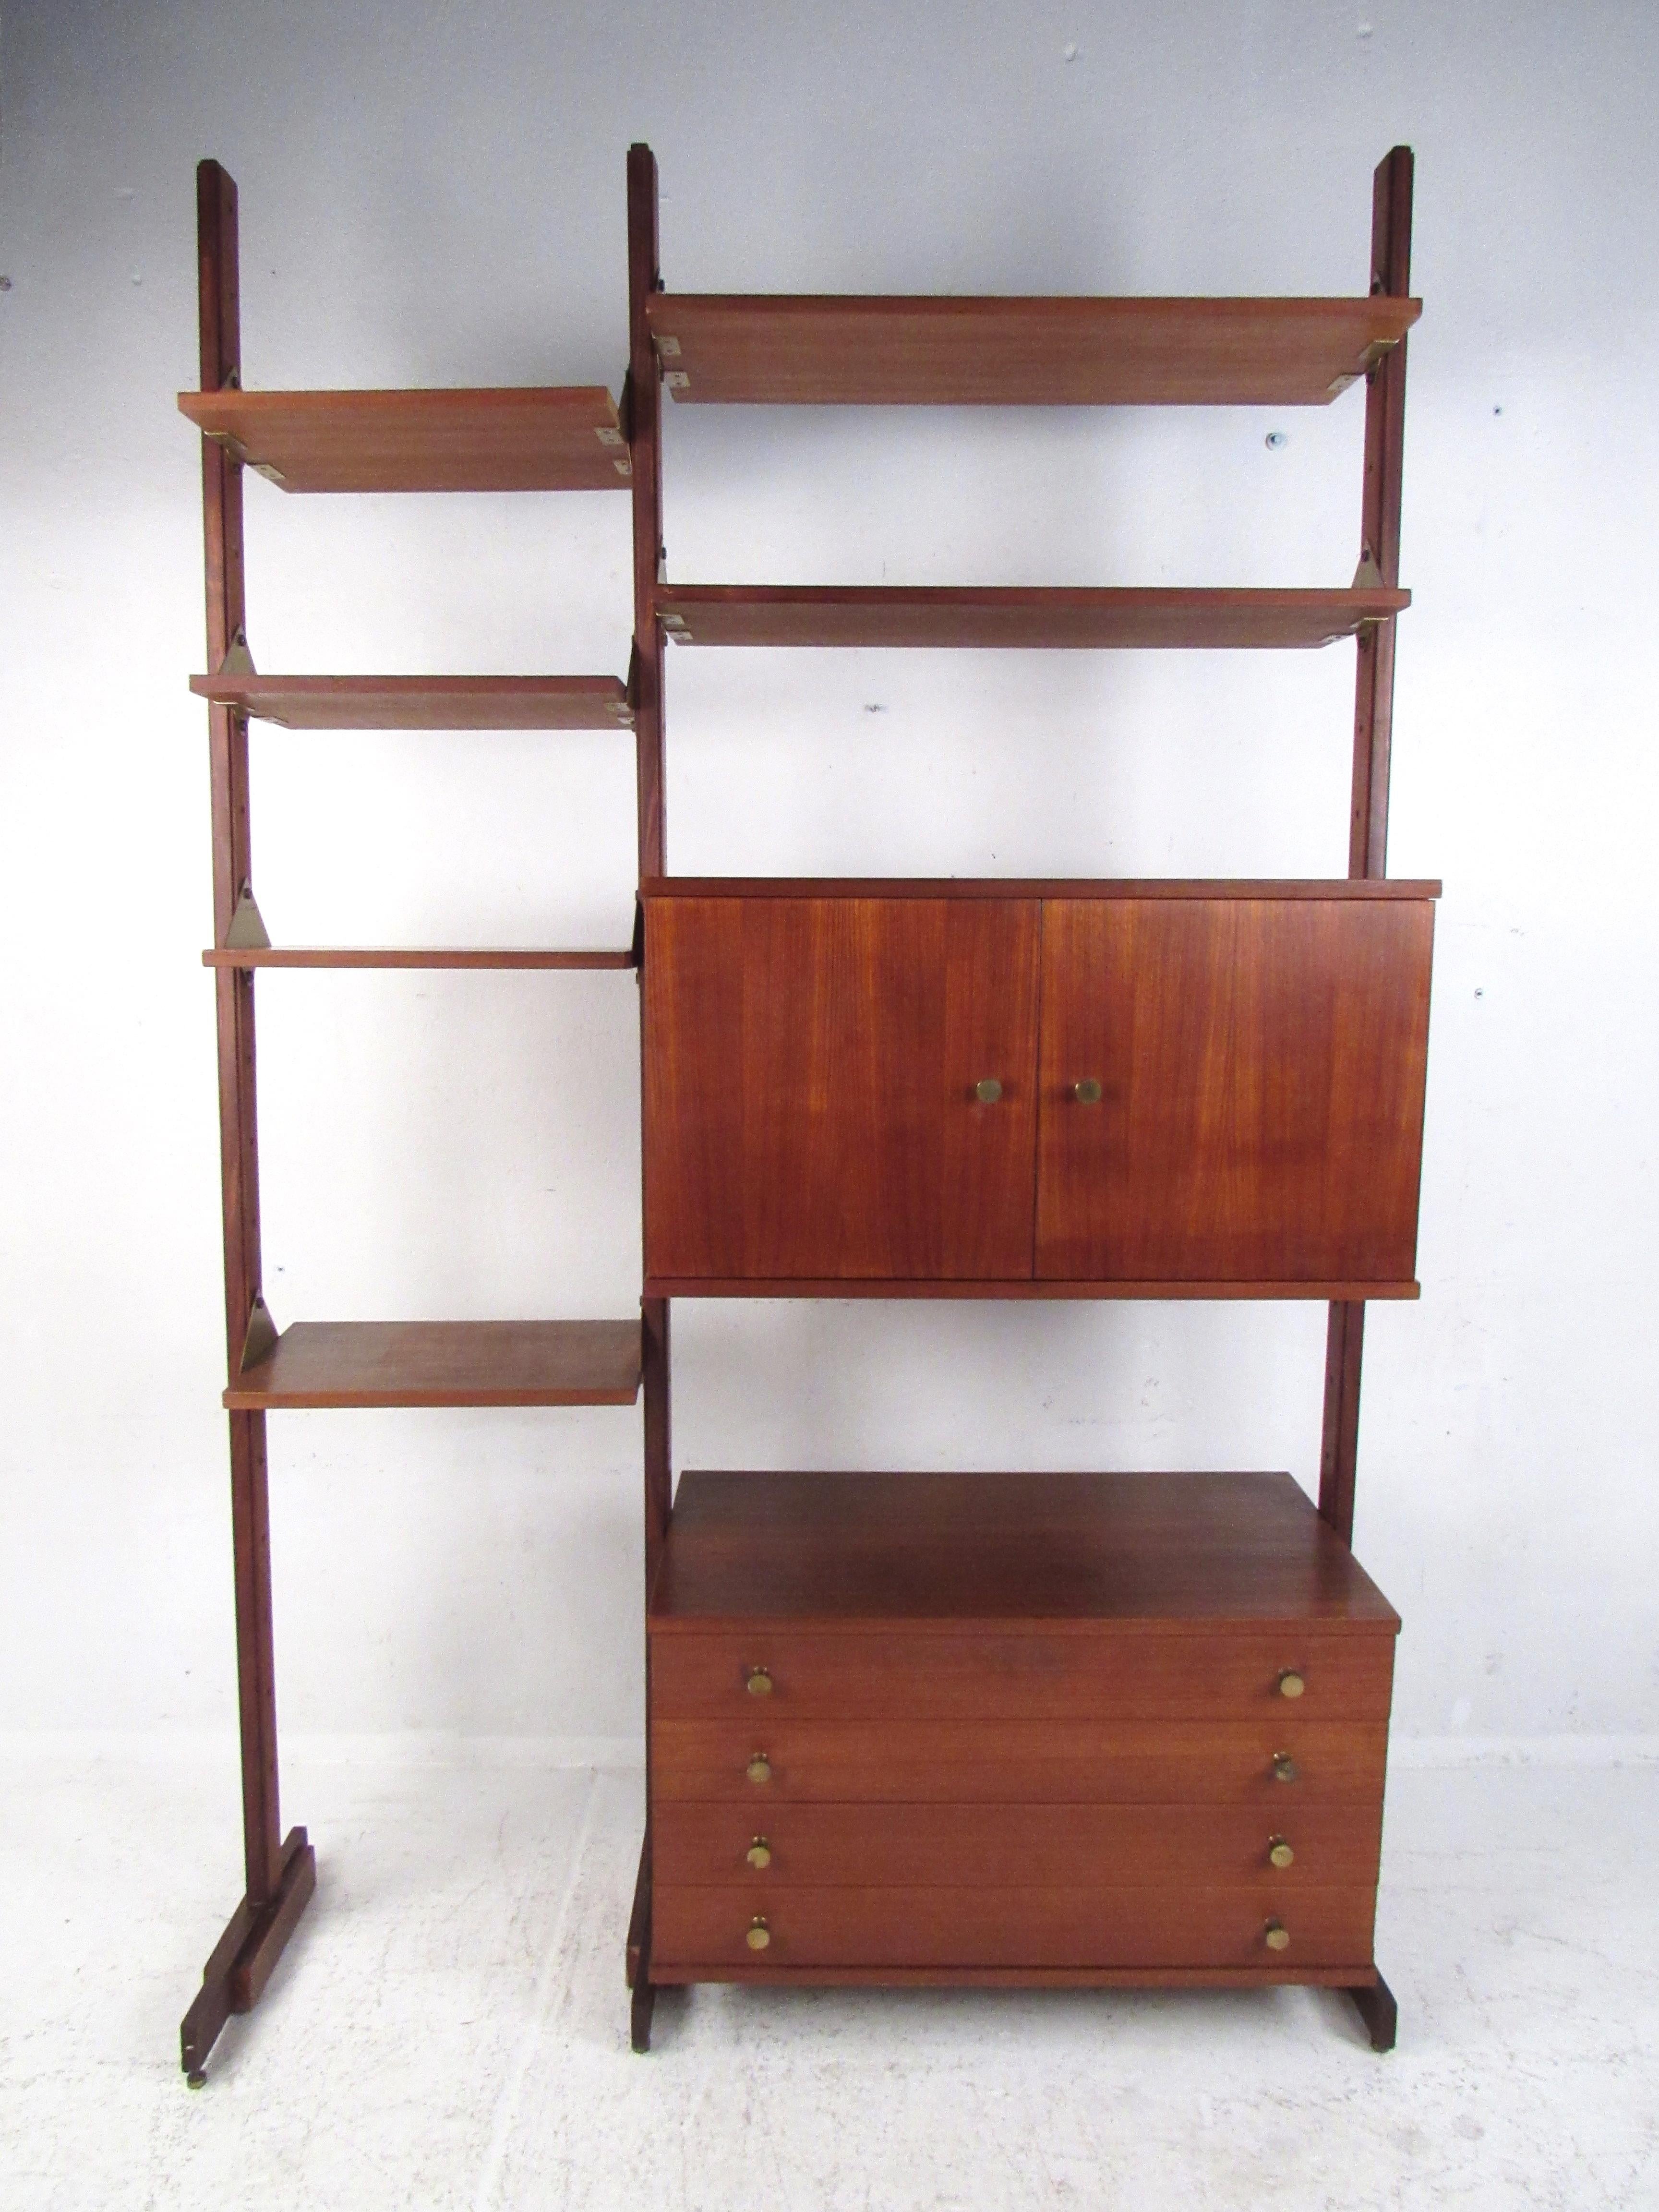 An impressive vintage Italian shelving unit that devotes one side entirely to displaying items on shelves while the other side offers storage options. Quality construction with a rich walnut finish, adjustable feet levelers, and brass handles. The